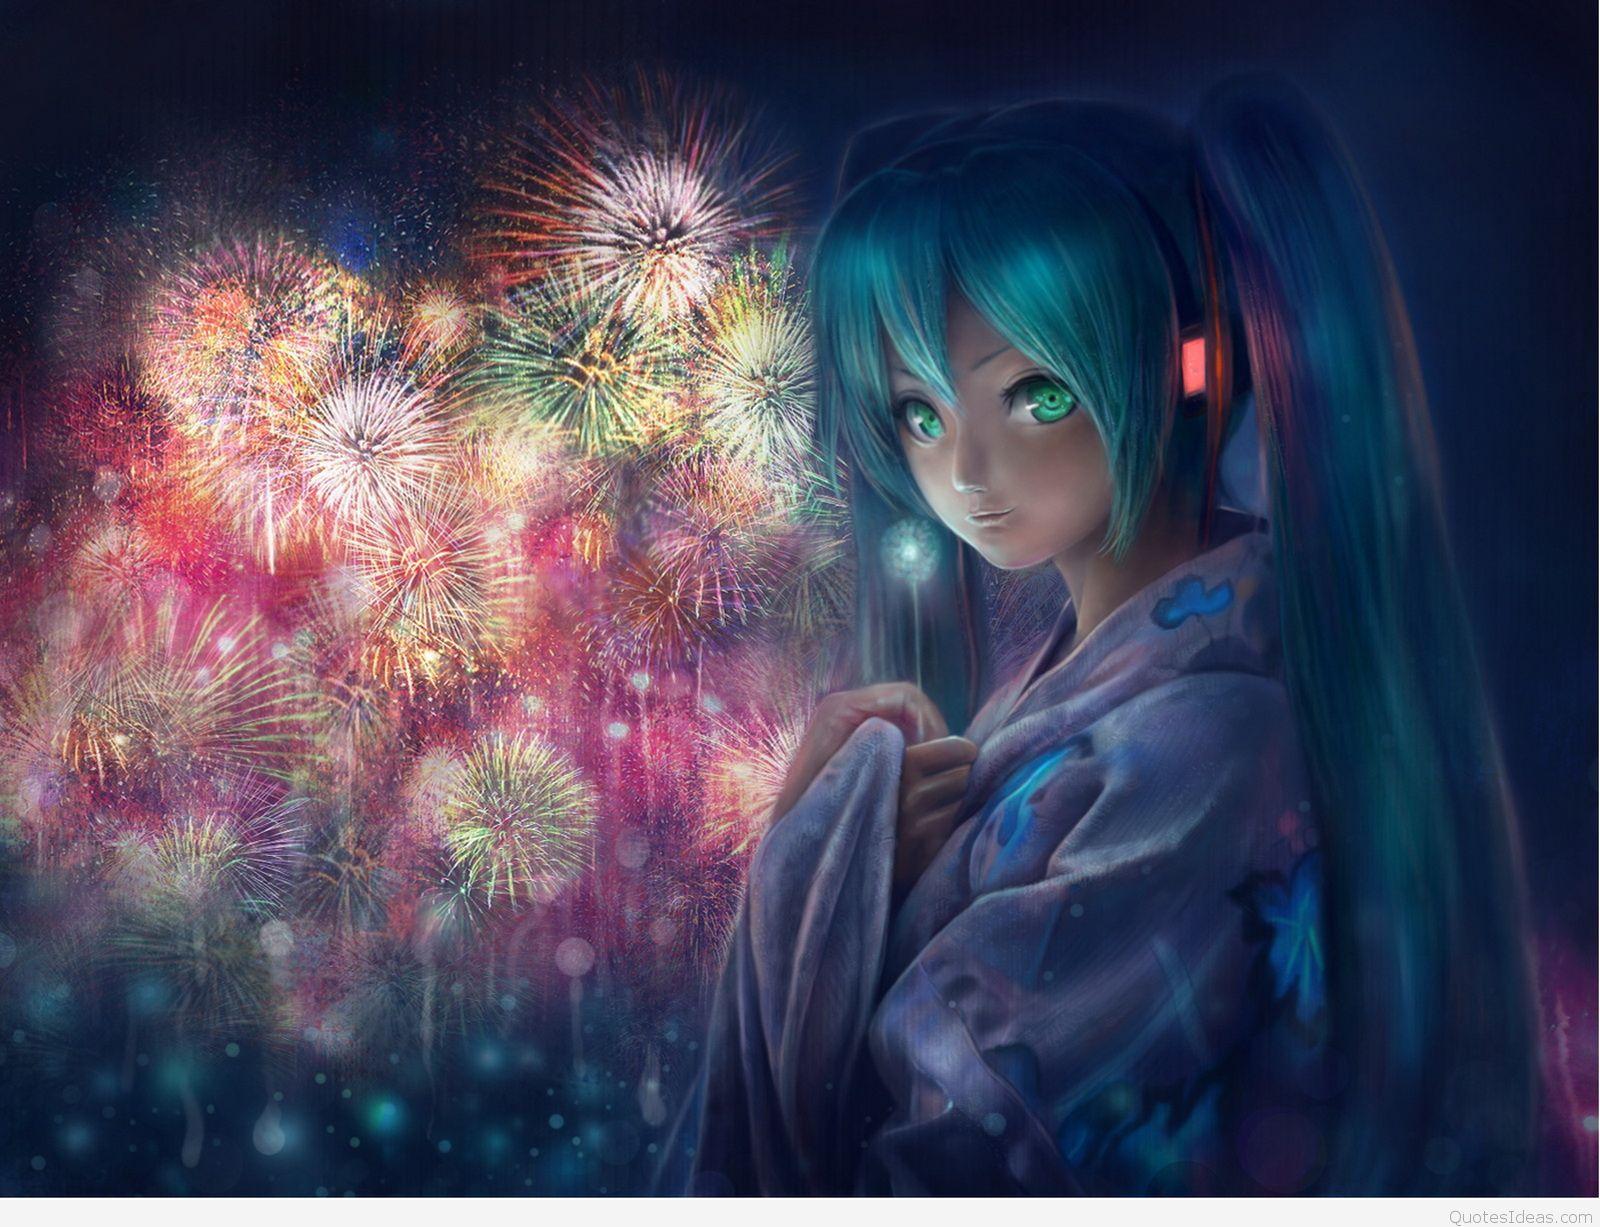 Happy New Year Anime Wallpapers - Wallpaper Cave